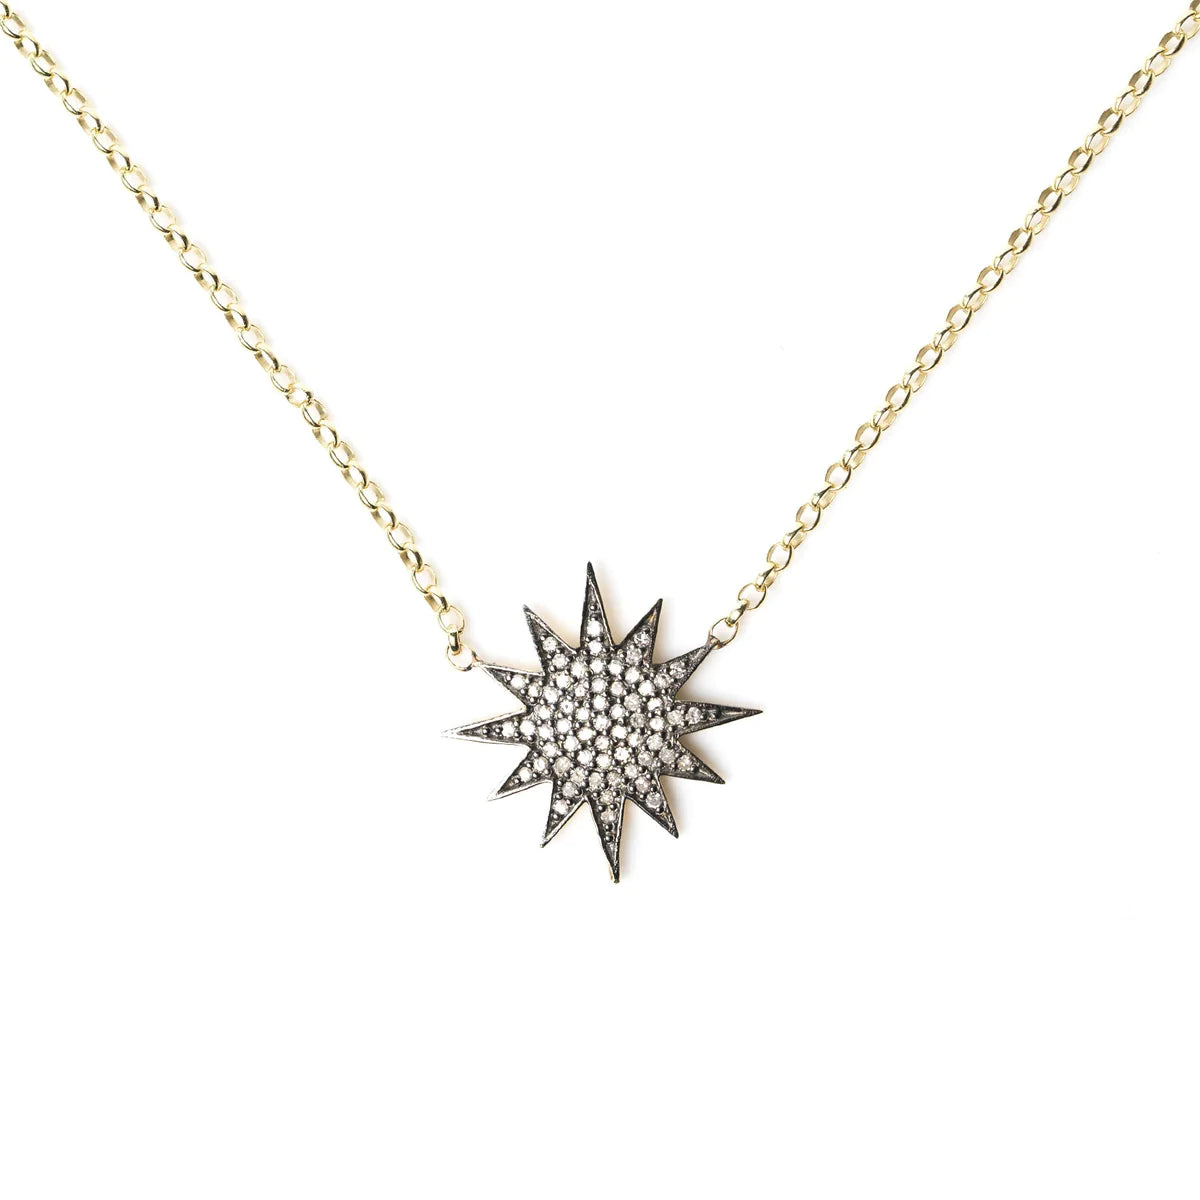 Gold chain with oxidised sterling silver starburst pendant with pave diamonds